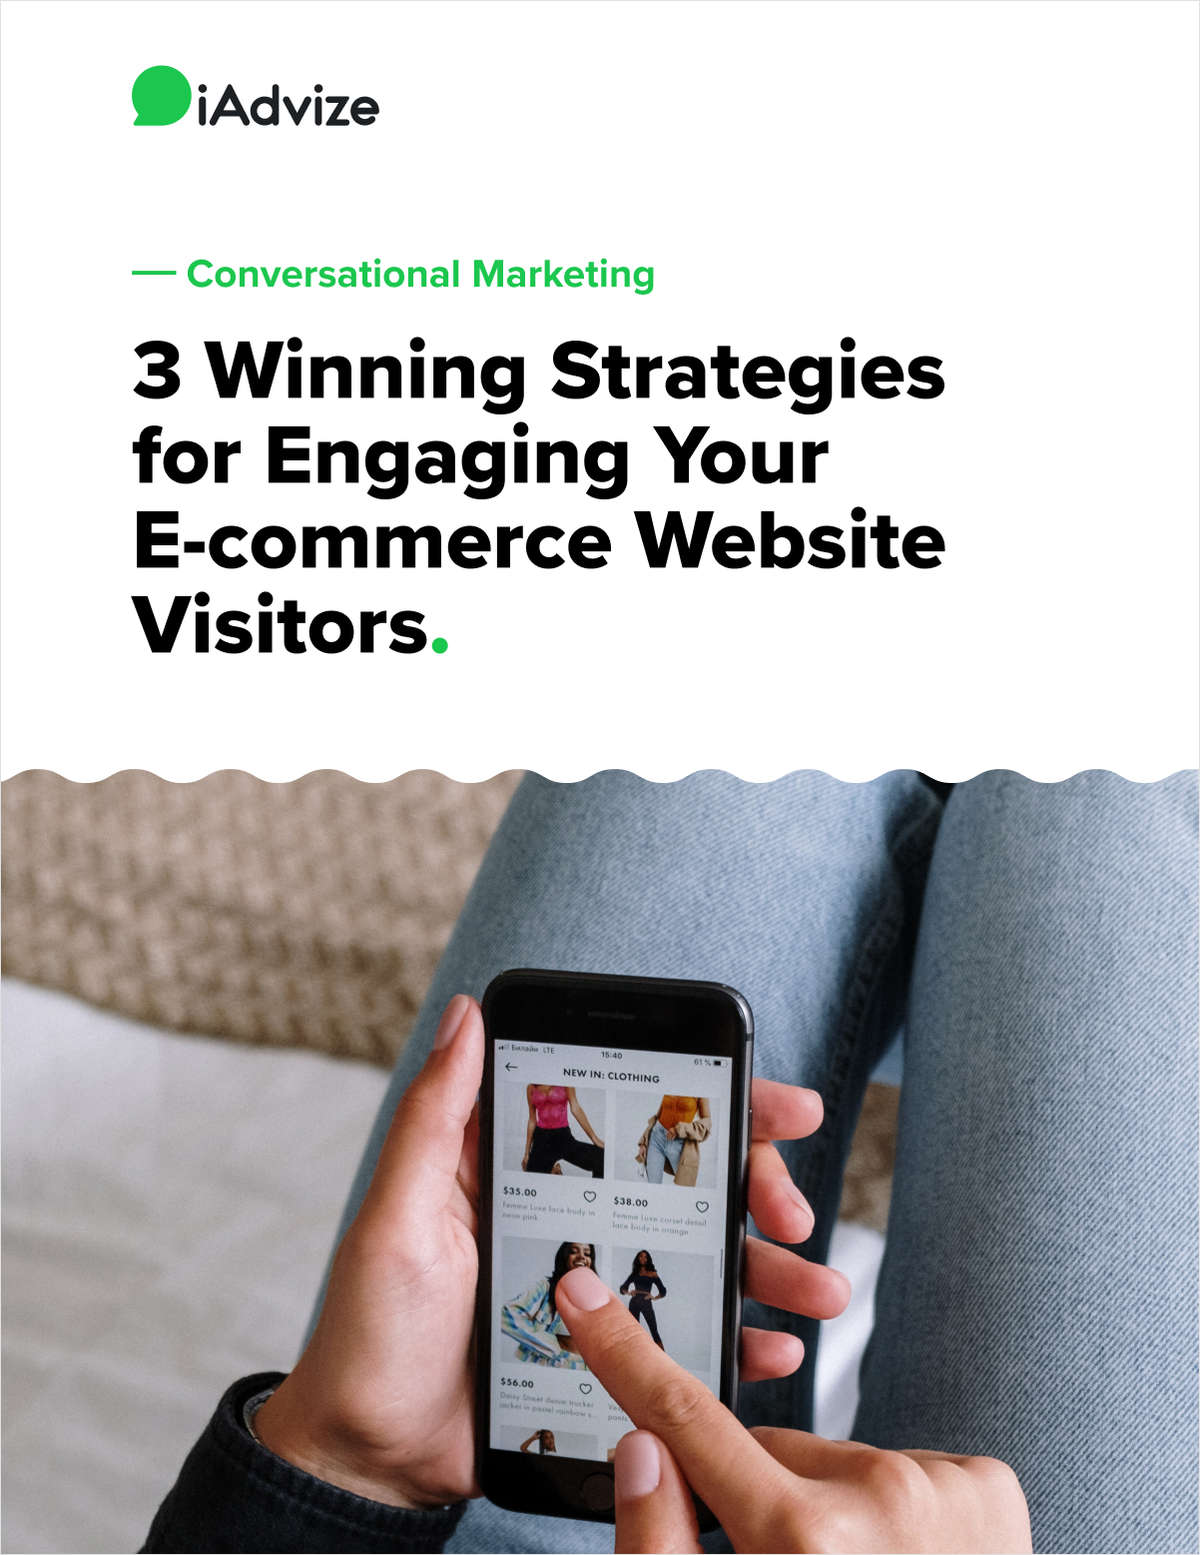 3 Winning Strategies for Engaging Your E-commerce Website Visitors